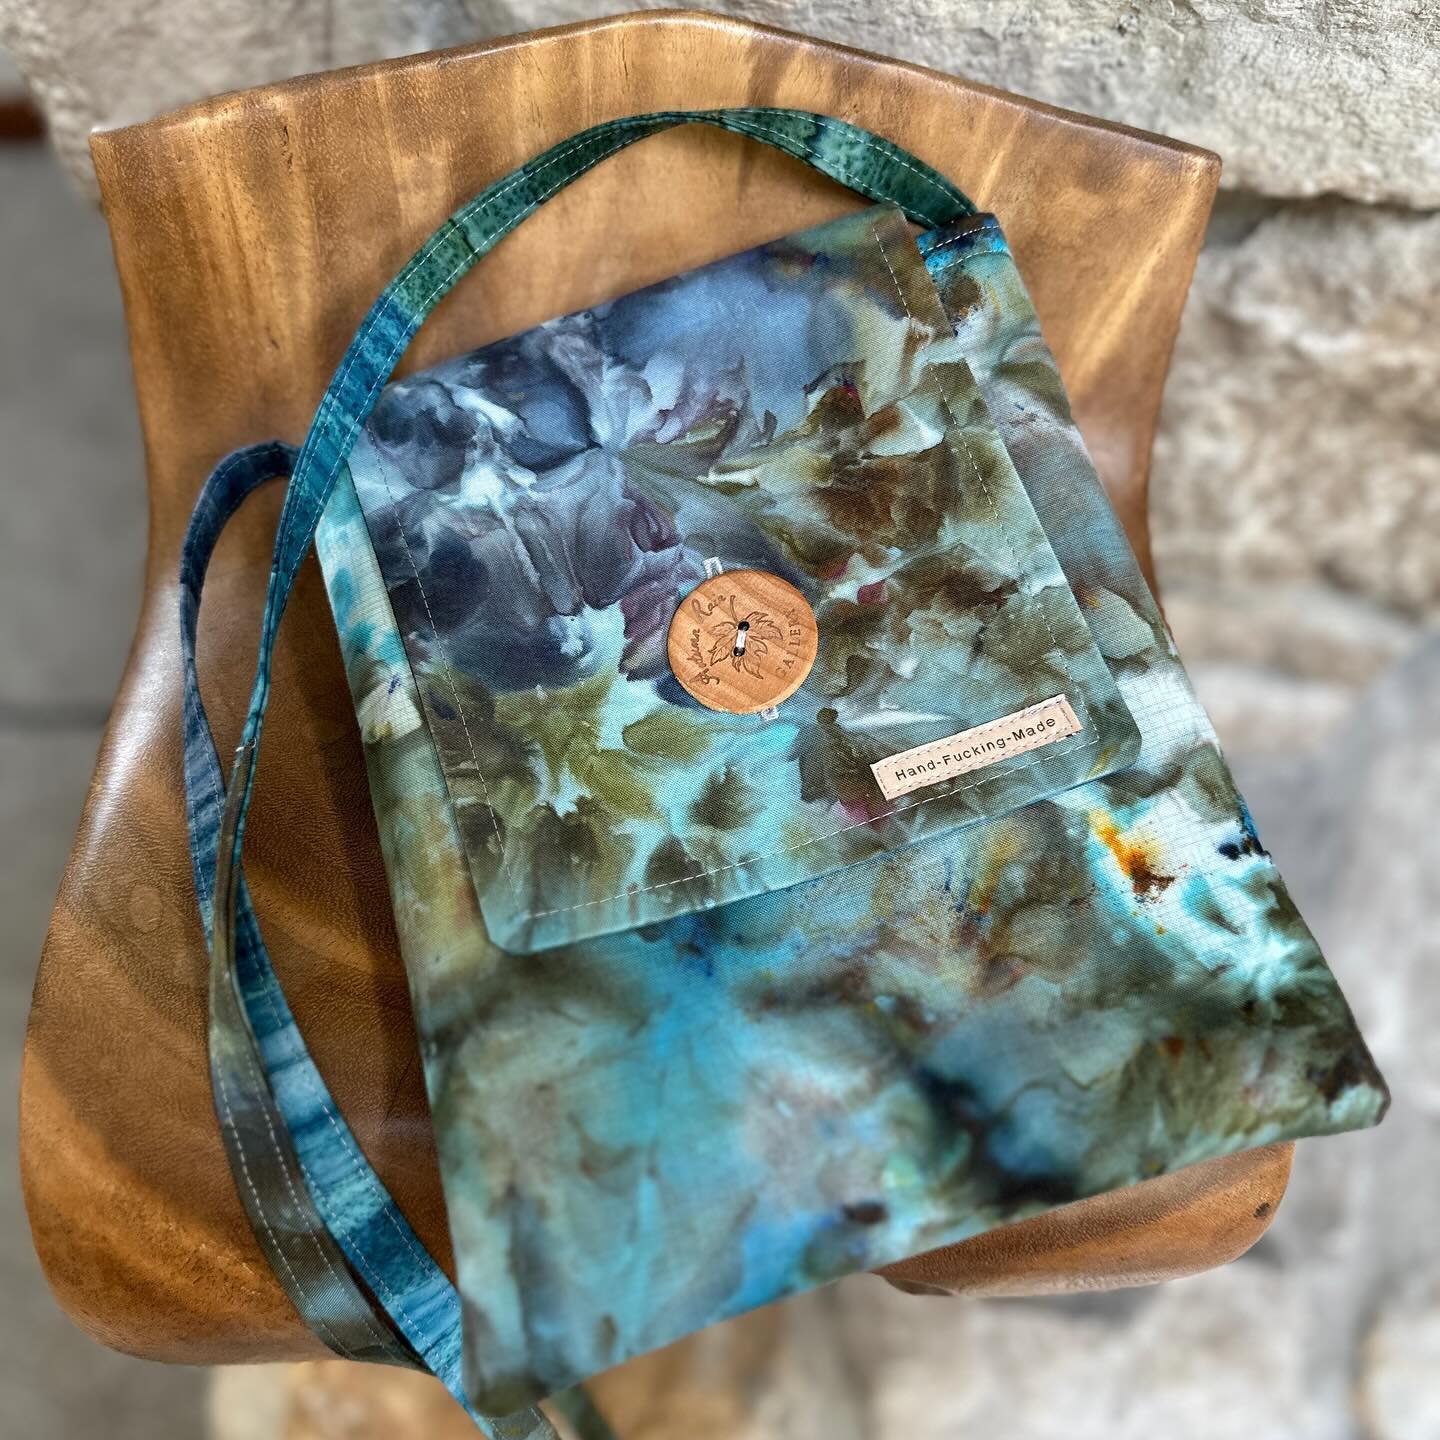 A  P U L M O N A R Y  A R T  C O L L A B 

I dye the fabric and Debbie makes the gorgeous bags! 

Pulmonary rehab friends, sewing friends, maker friends, whatever else you want to call us.  We both have lung diseases and both love fabric and sewing. 